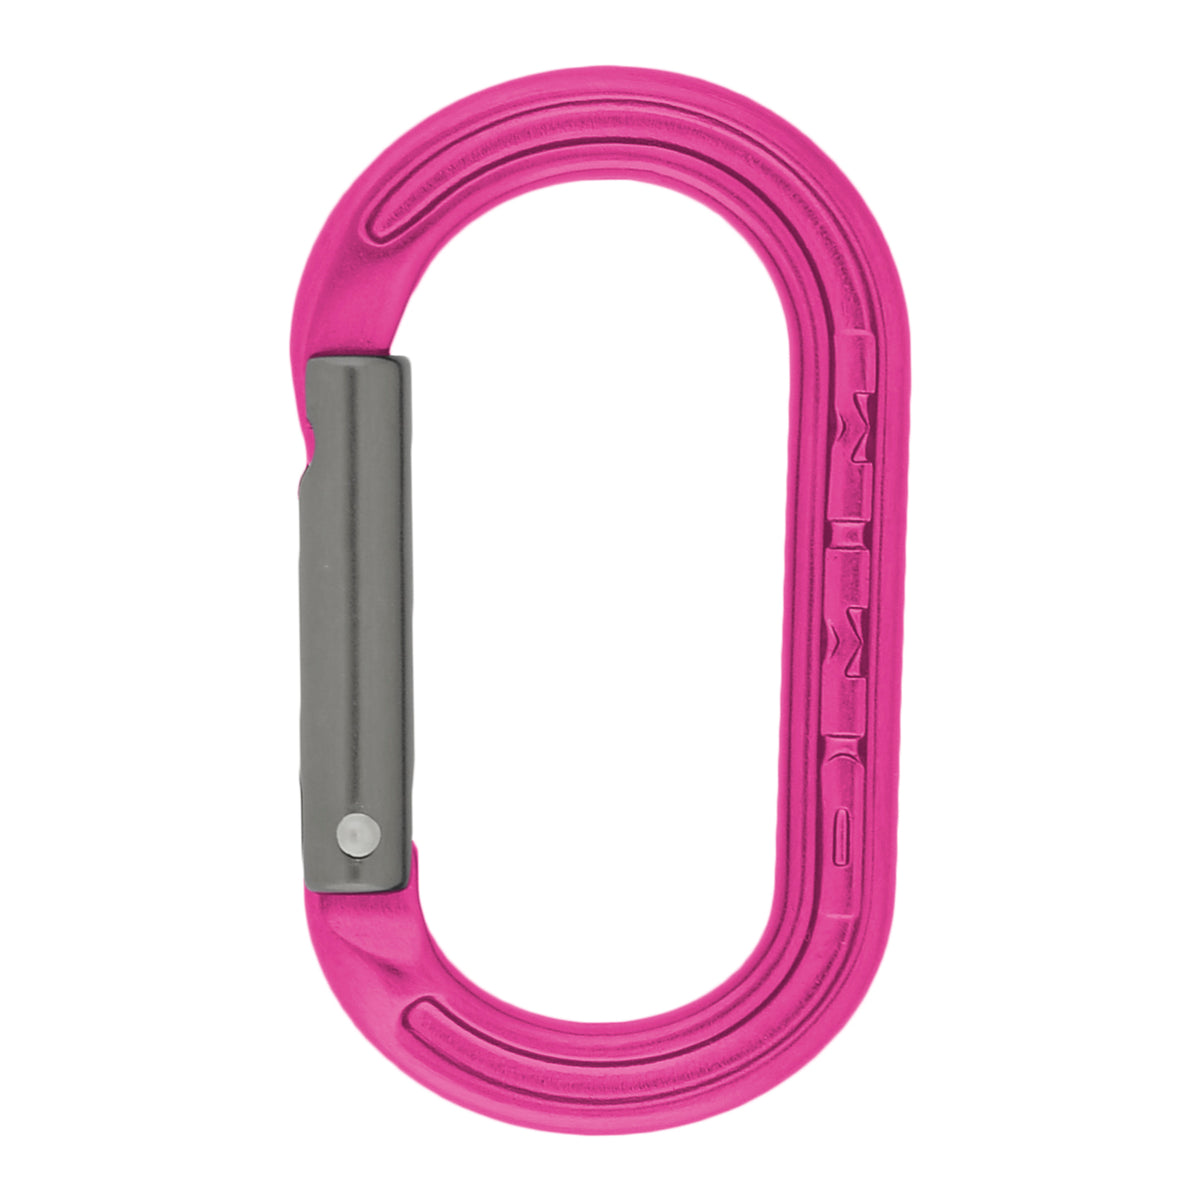 DMM XSRE (accessory) carabiner in Pink colour